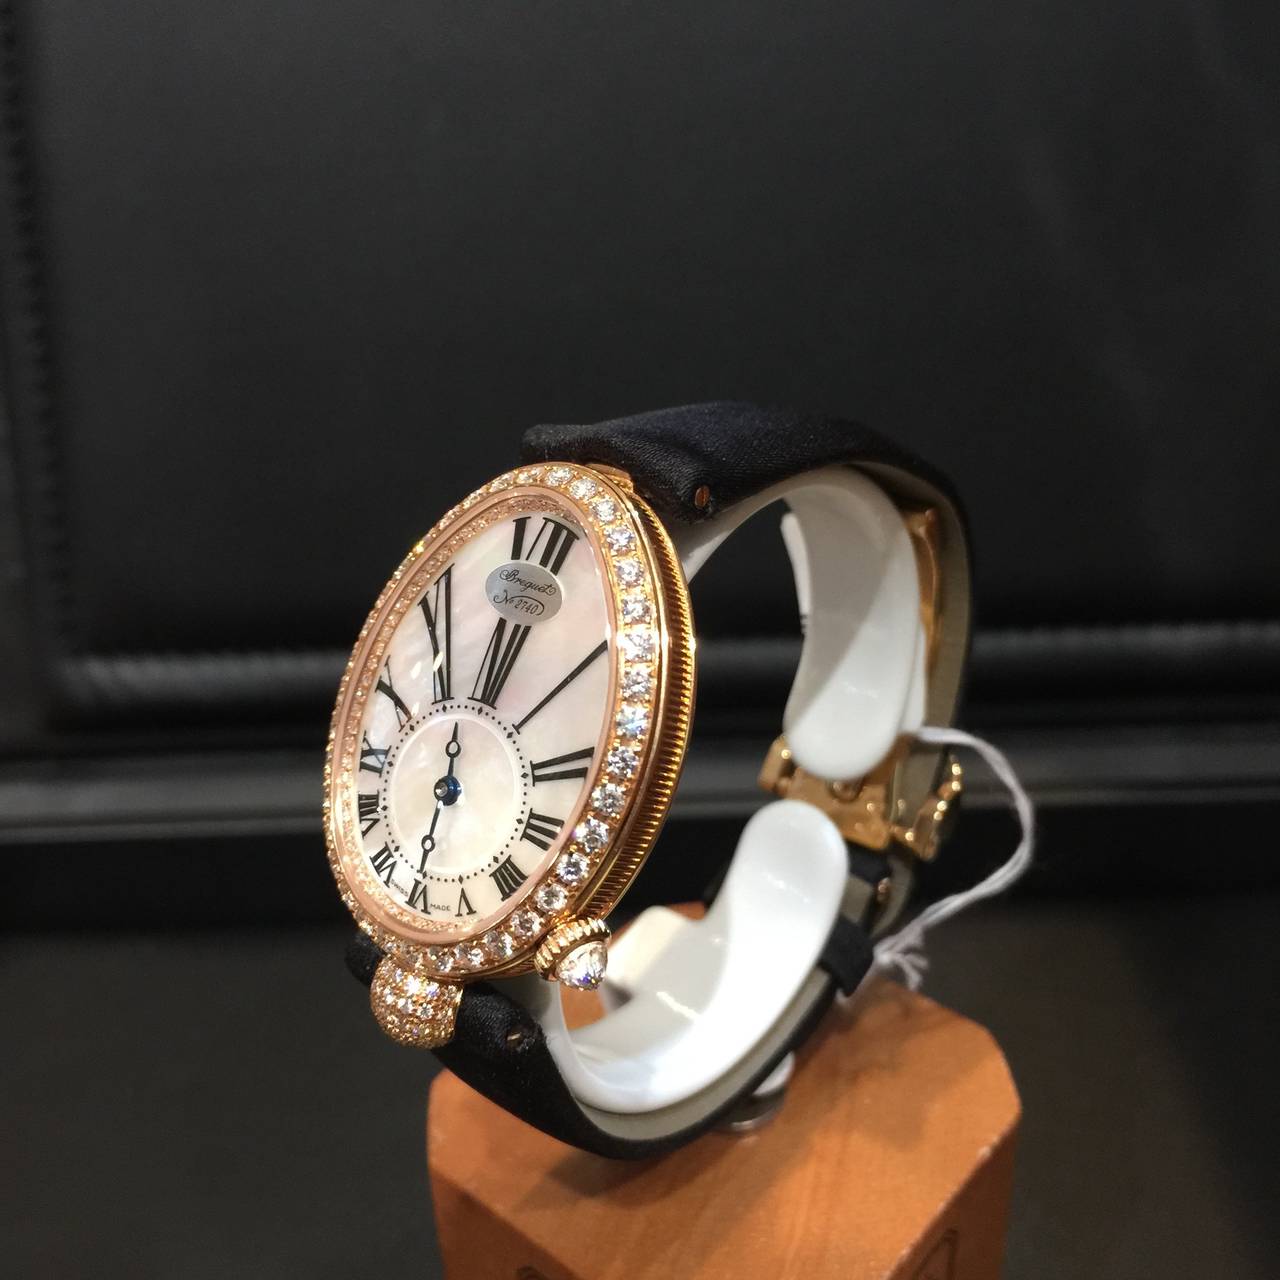 Ladies' Breguet Reine de Naples. Timepiece's dial is made in natural mother of pearl. 

Case is egg-shaped in 18-carat rose gold. Movement self-winding.with fine fluting on the caseband. Bezel, dial flange and ball attachment set with 139 diamonds